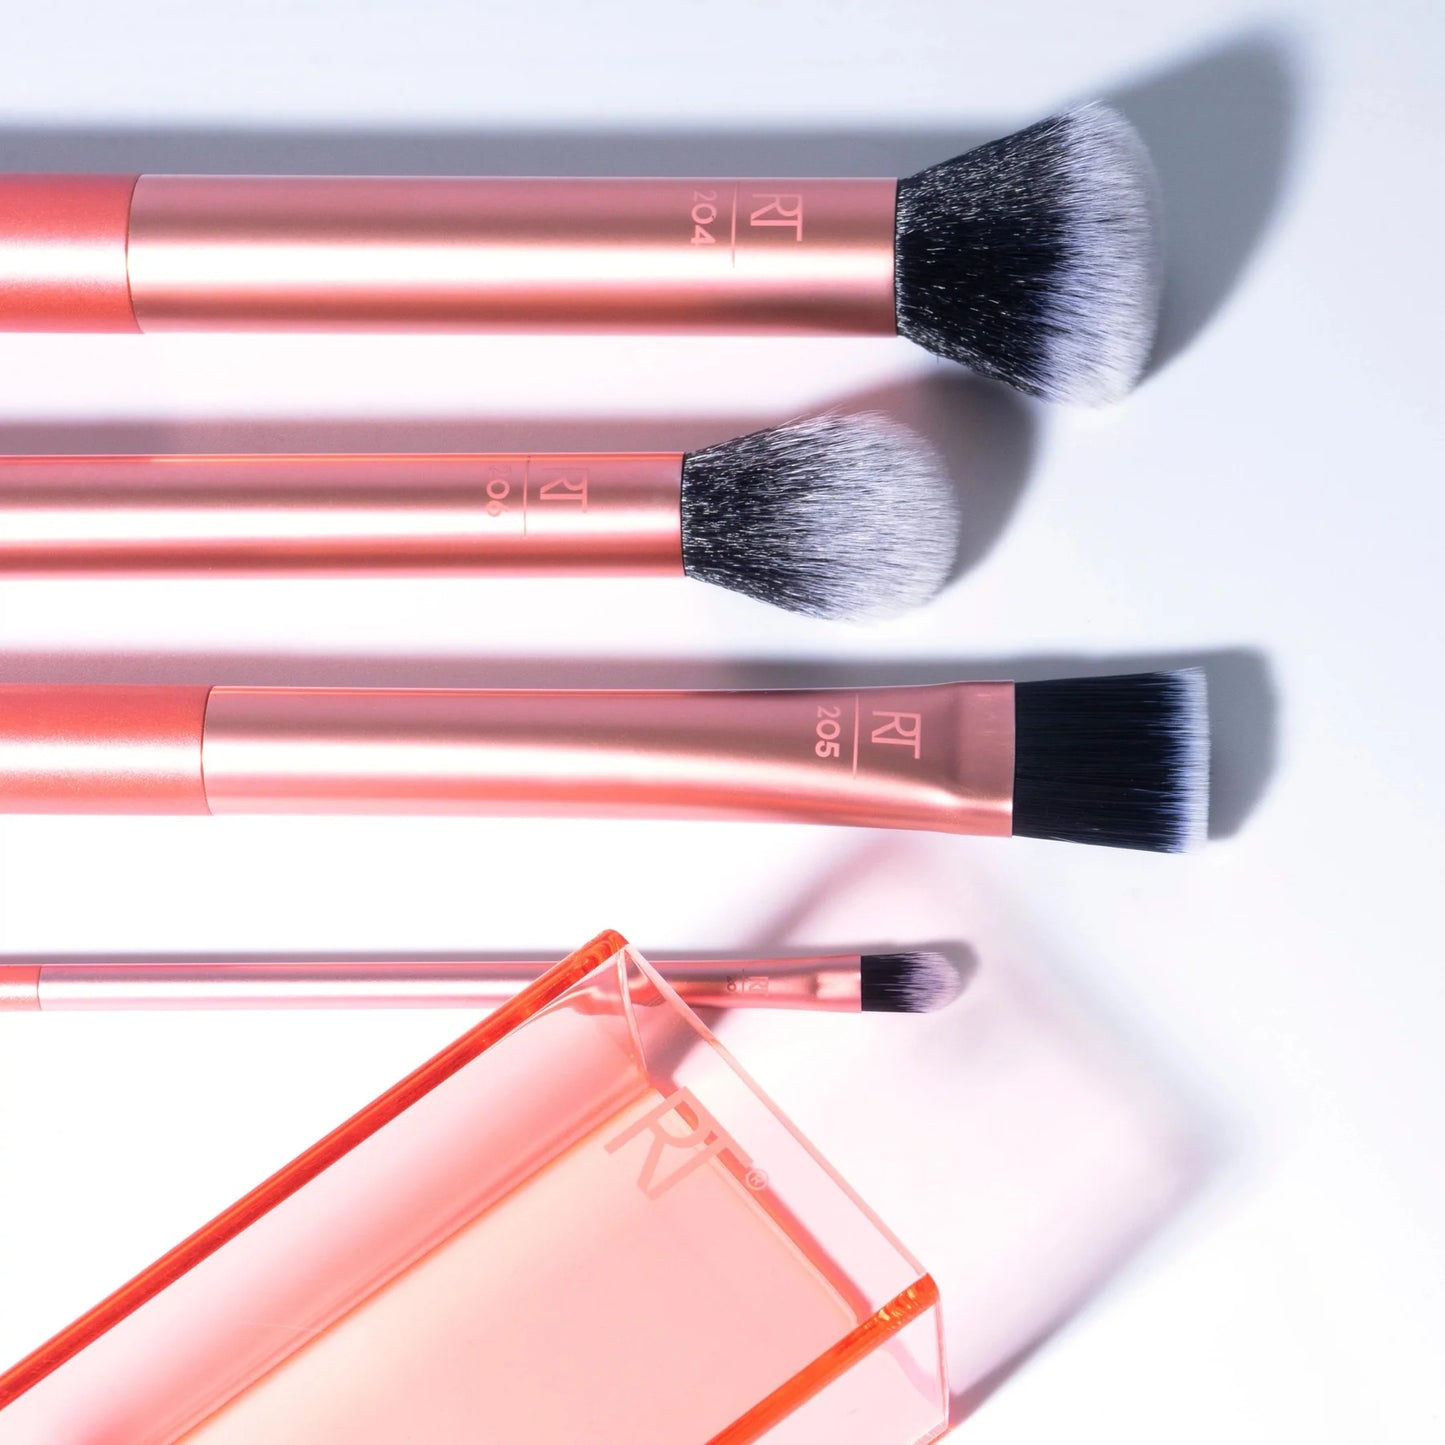 REAL TECHNIQUES Flawless Base Makeup Brush Set